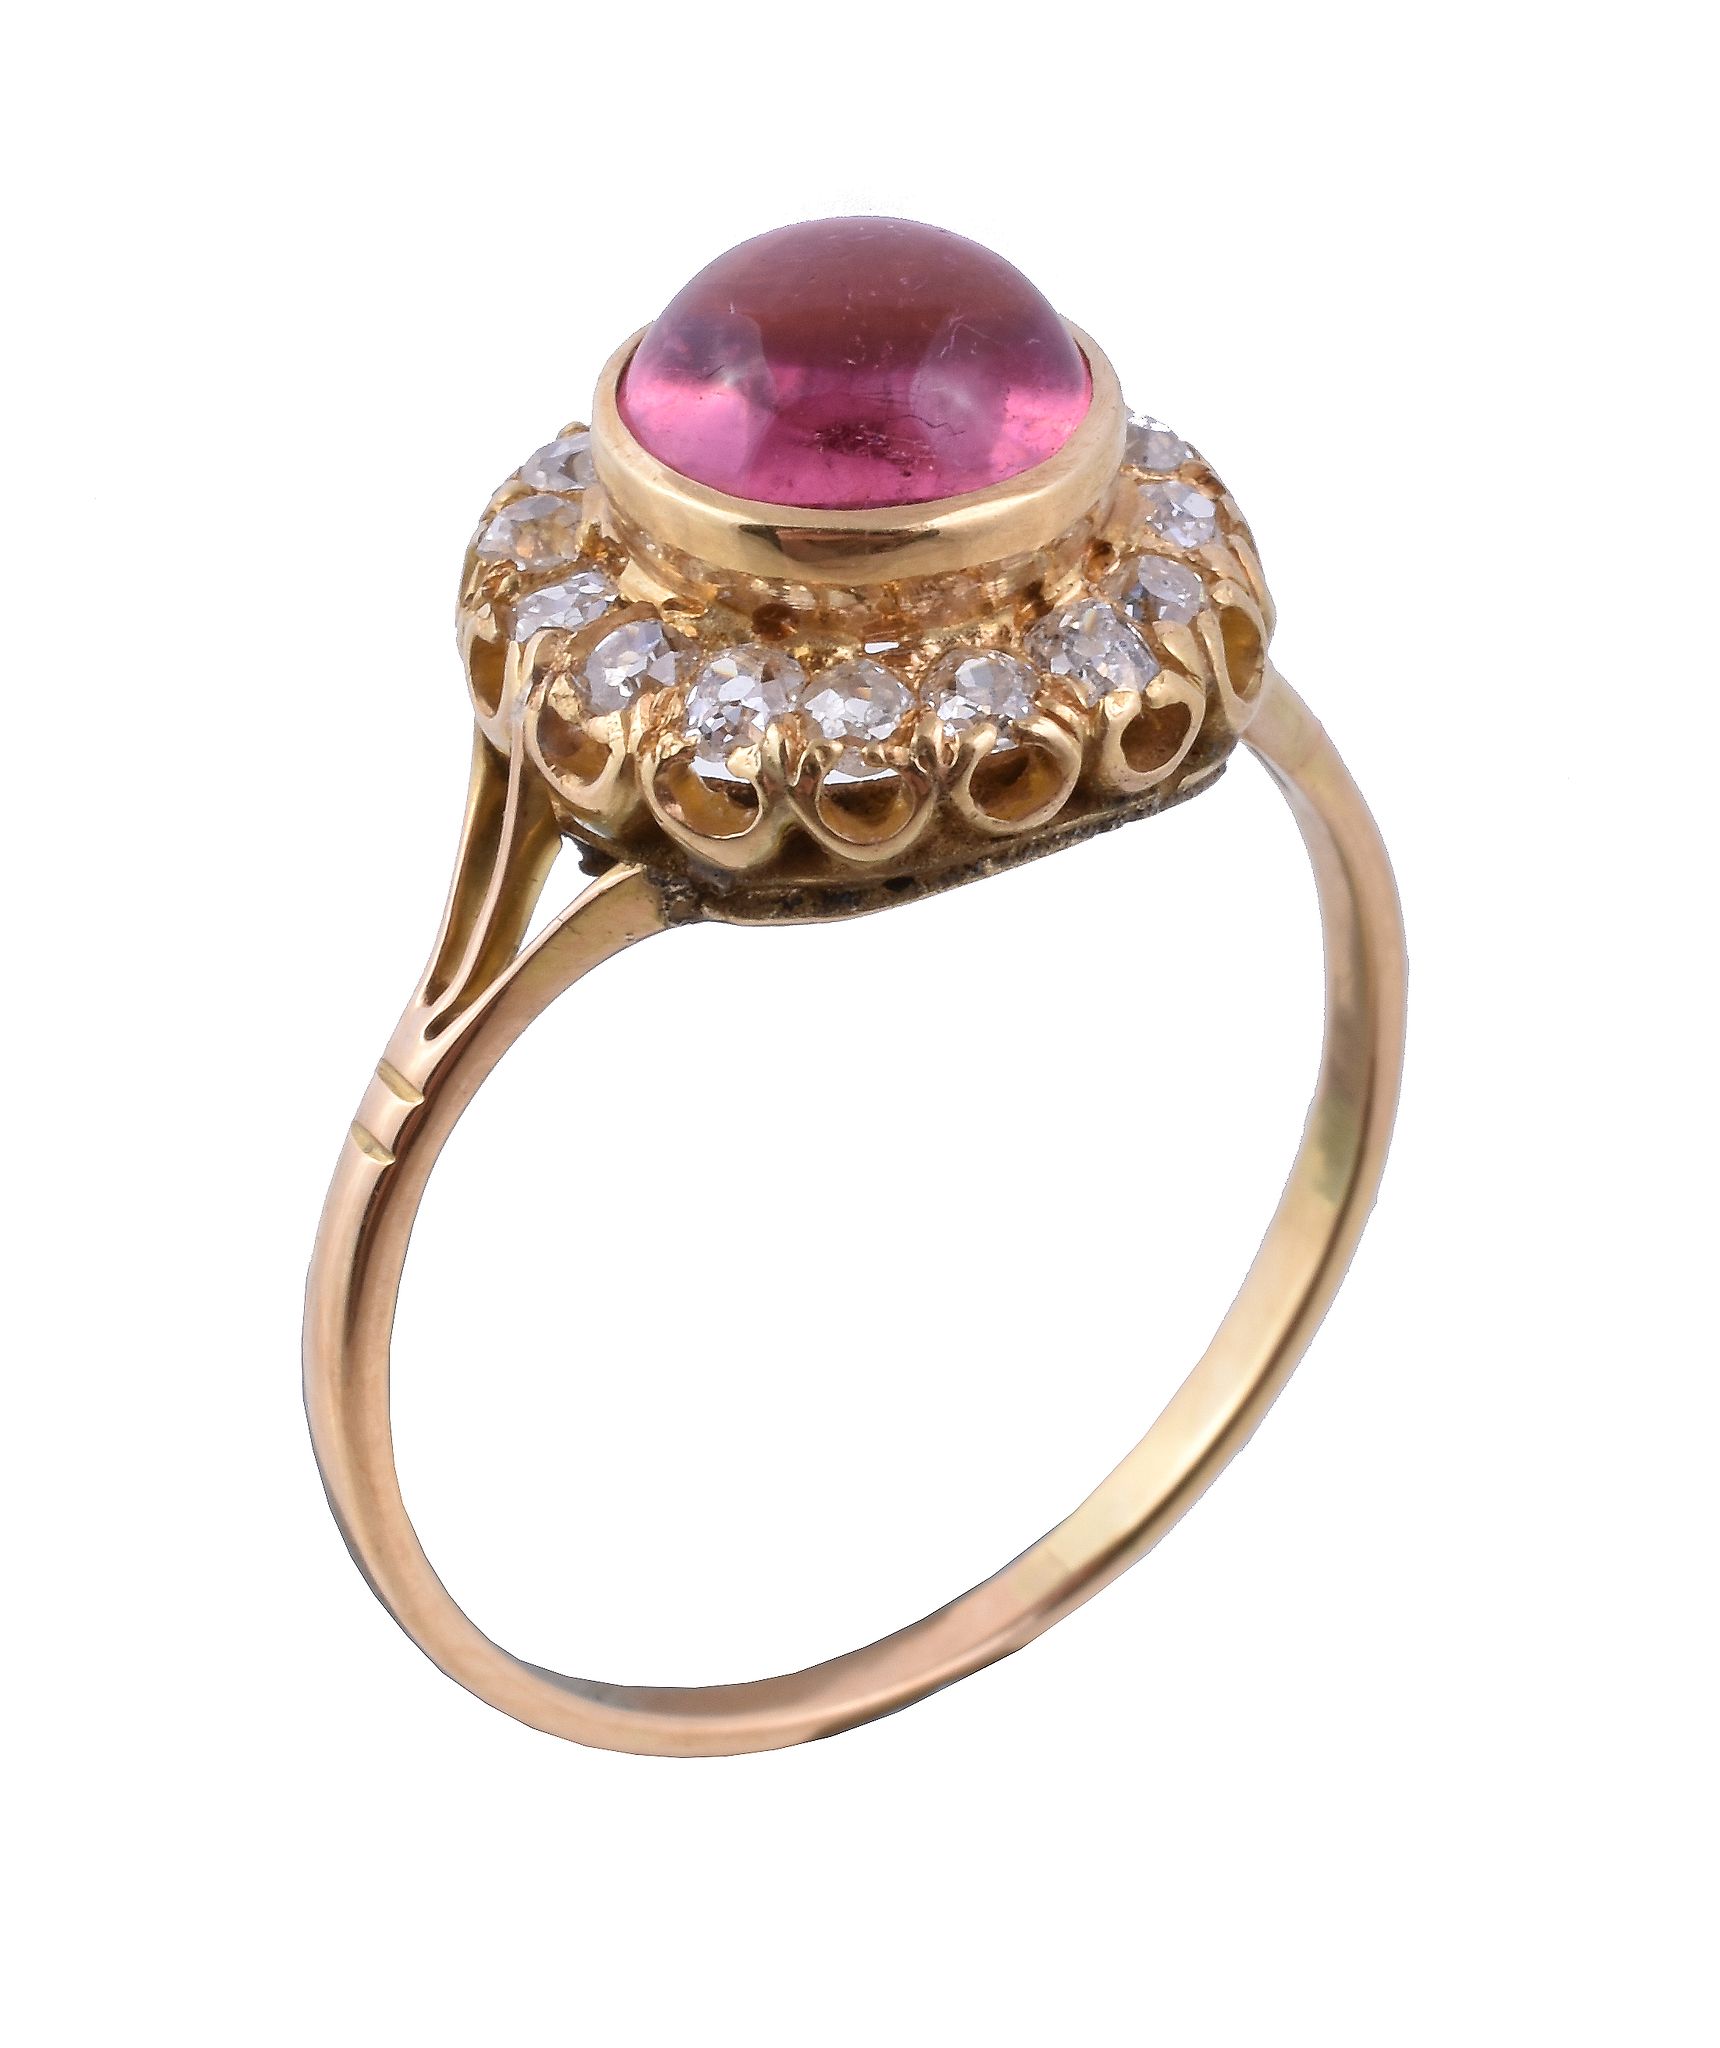 A pink tourmaline and diamond ring, the circular cabochon pink tourmaline collet set within a